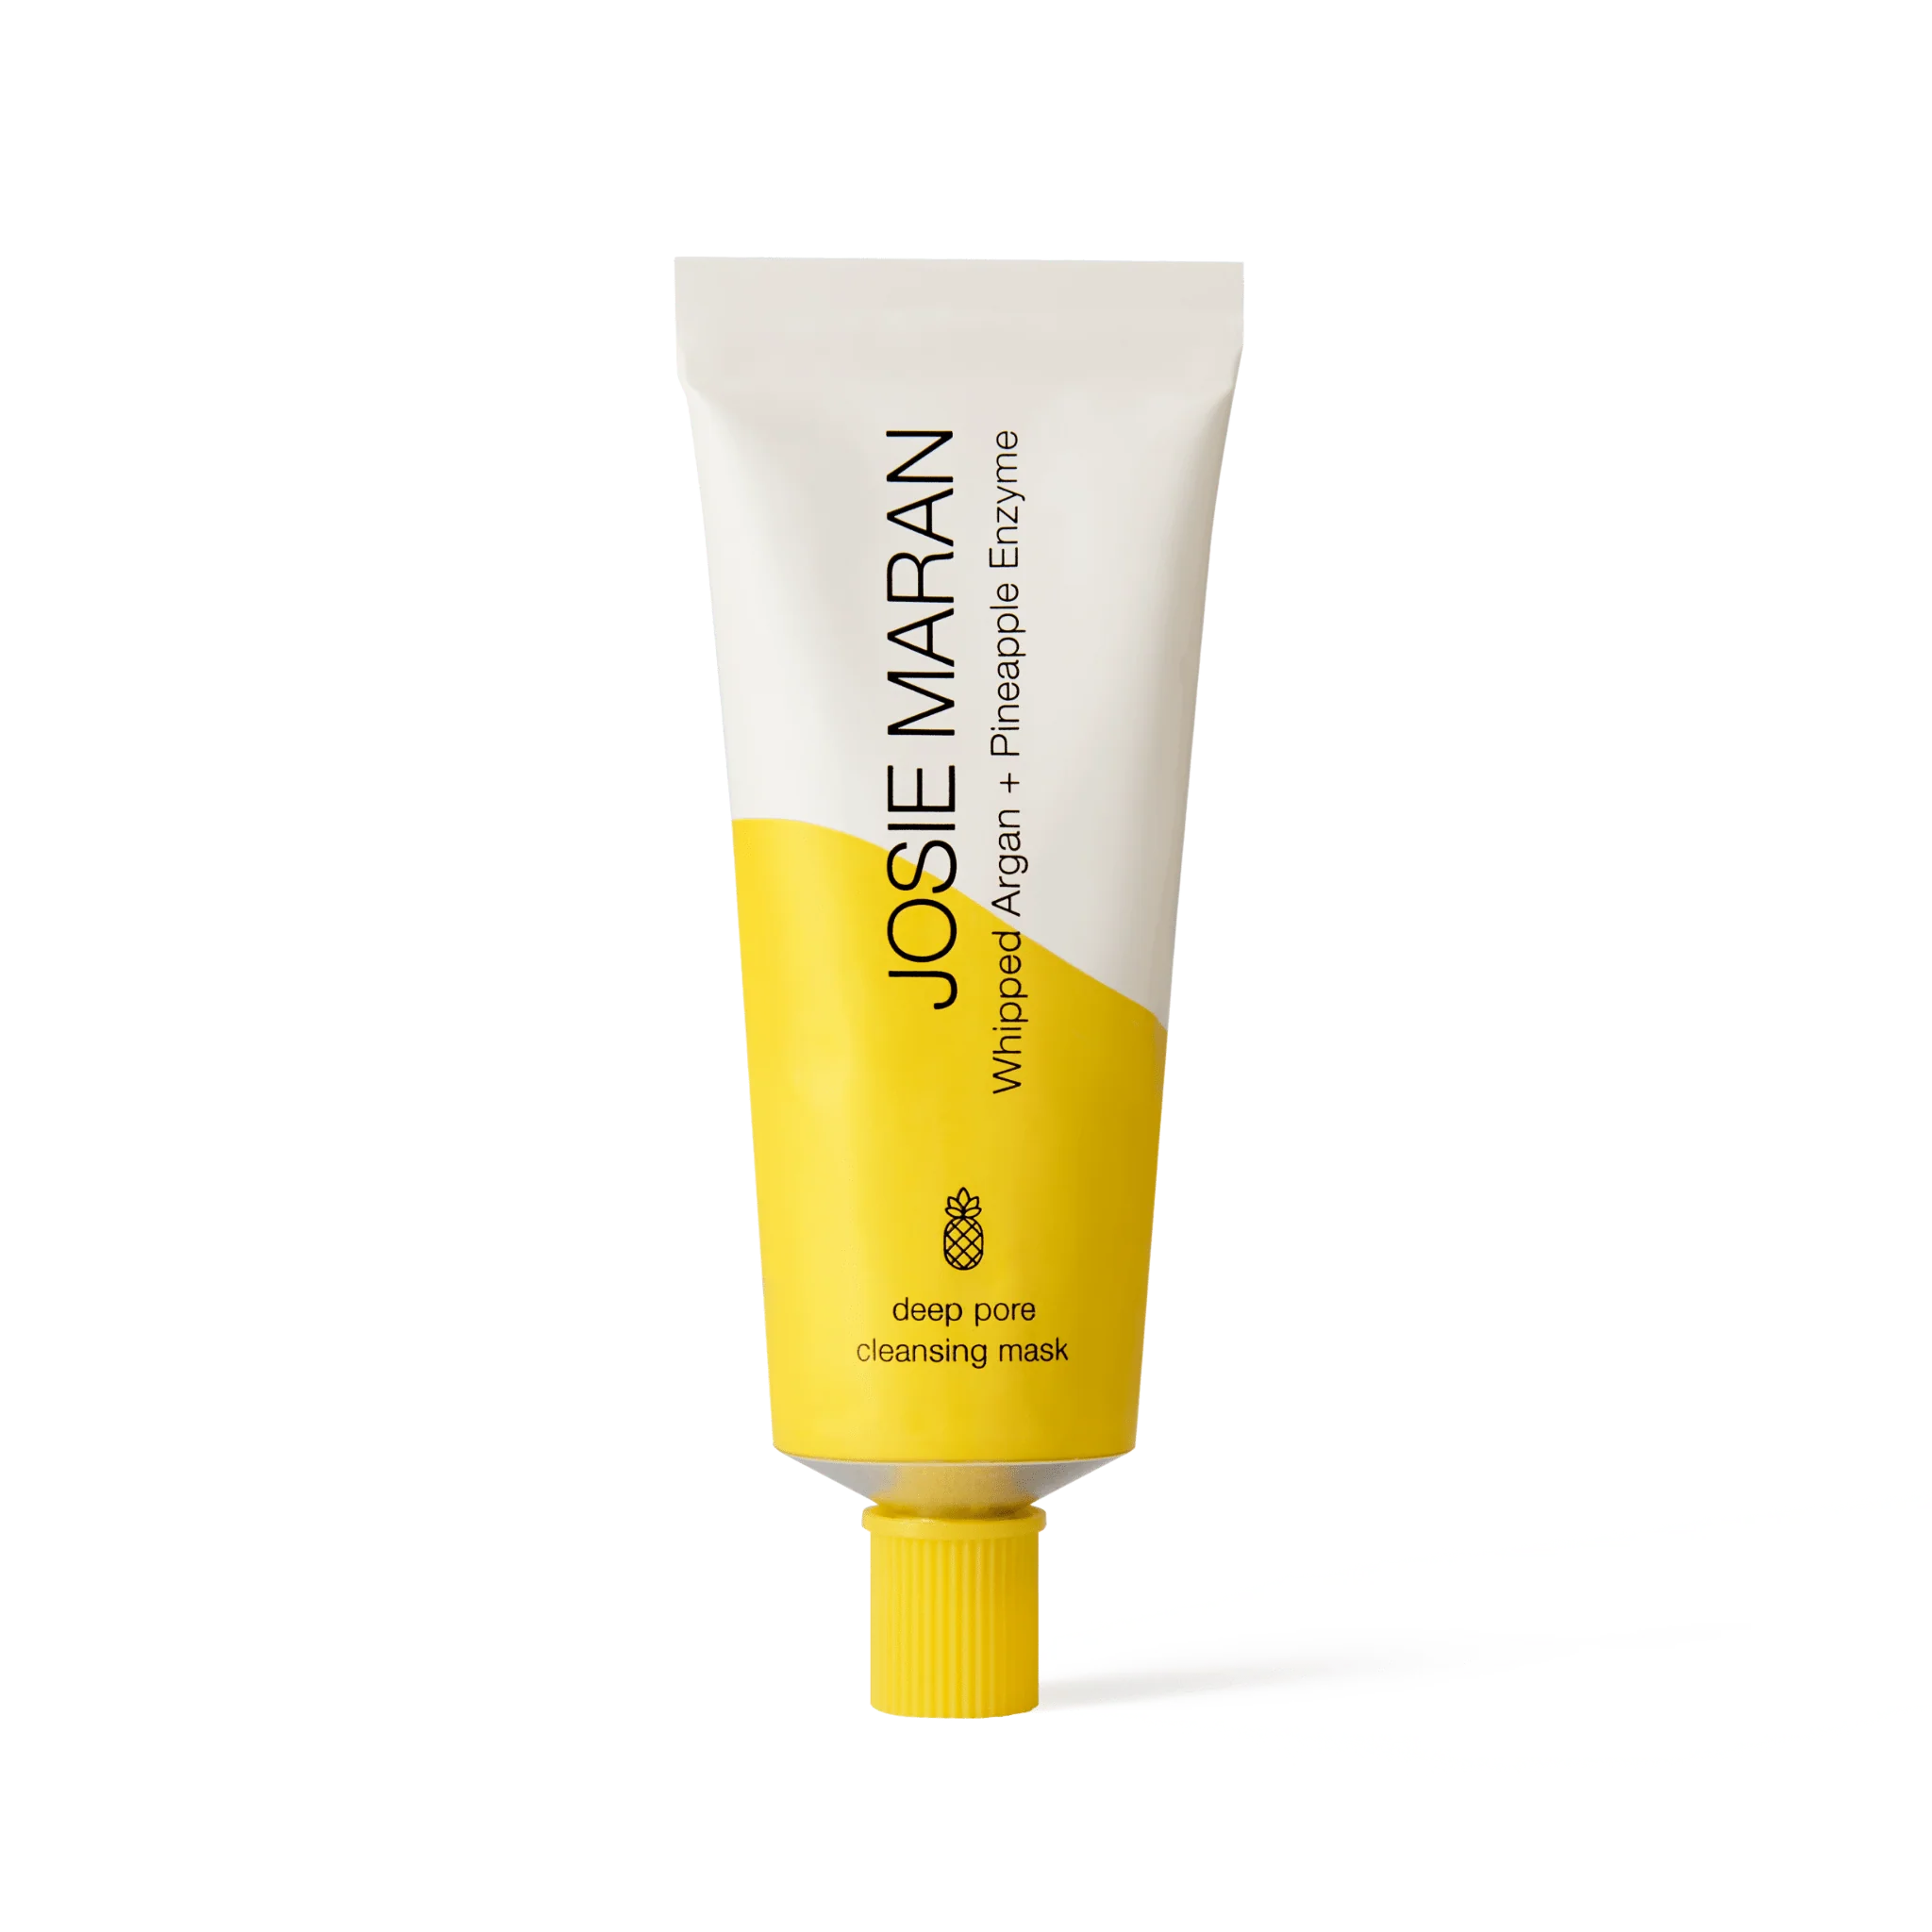 WHIPPED ARGAN + PINEAPPLE ENZYME DEEP PORE CLEANSING MASK
